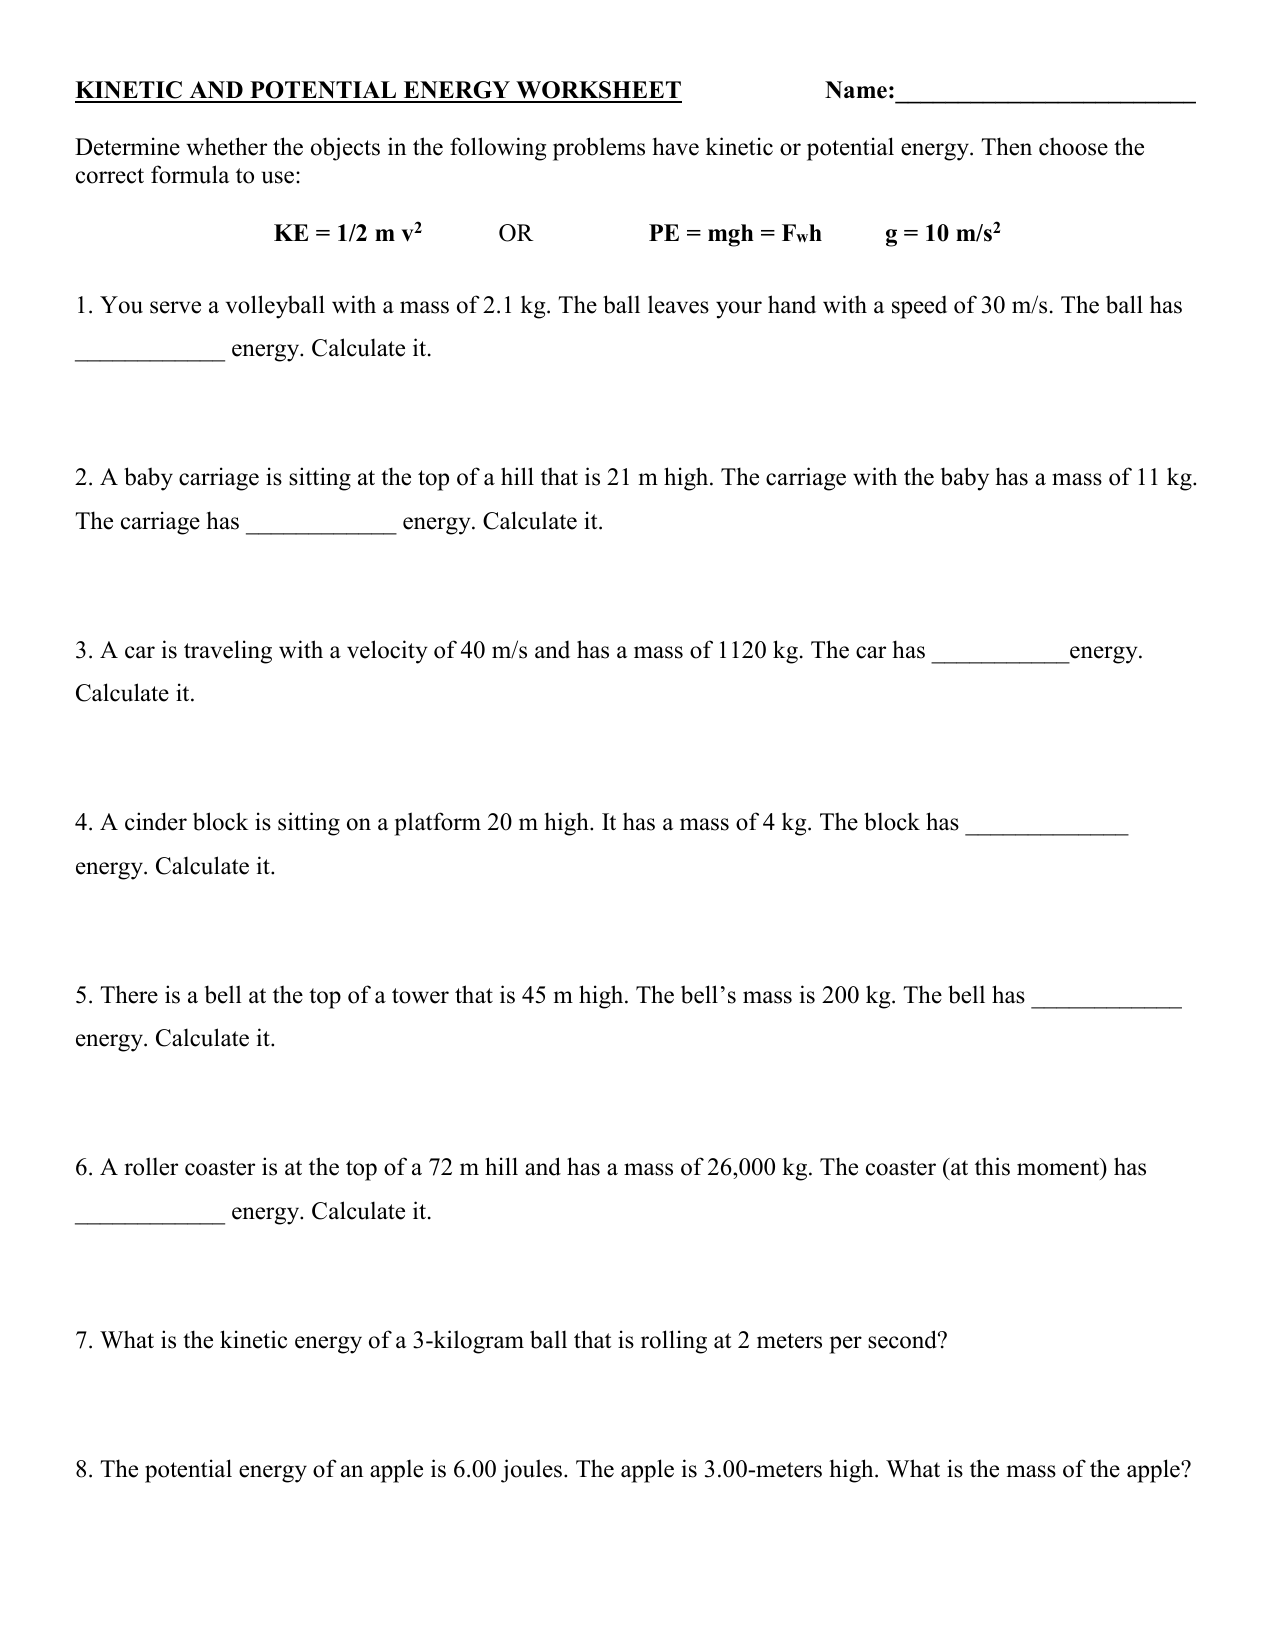 Kinetic and Potential Energy Worksheet Regarding Potential And Kinetic Energy Worksheet